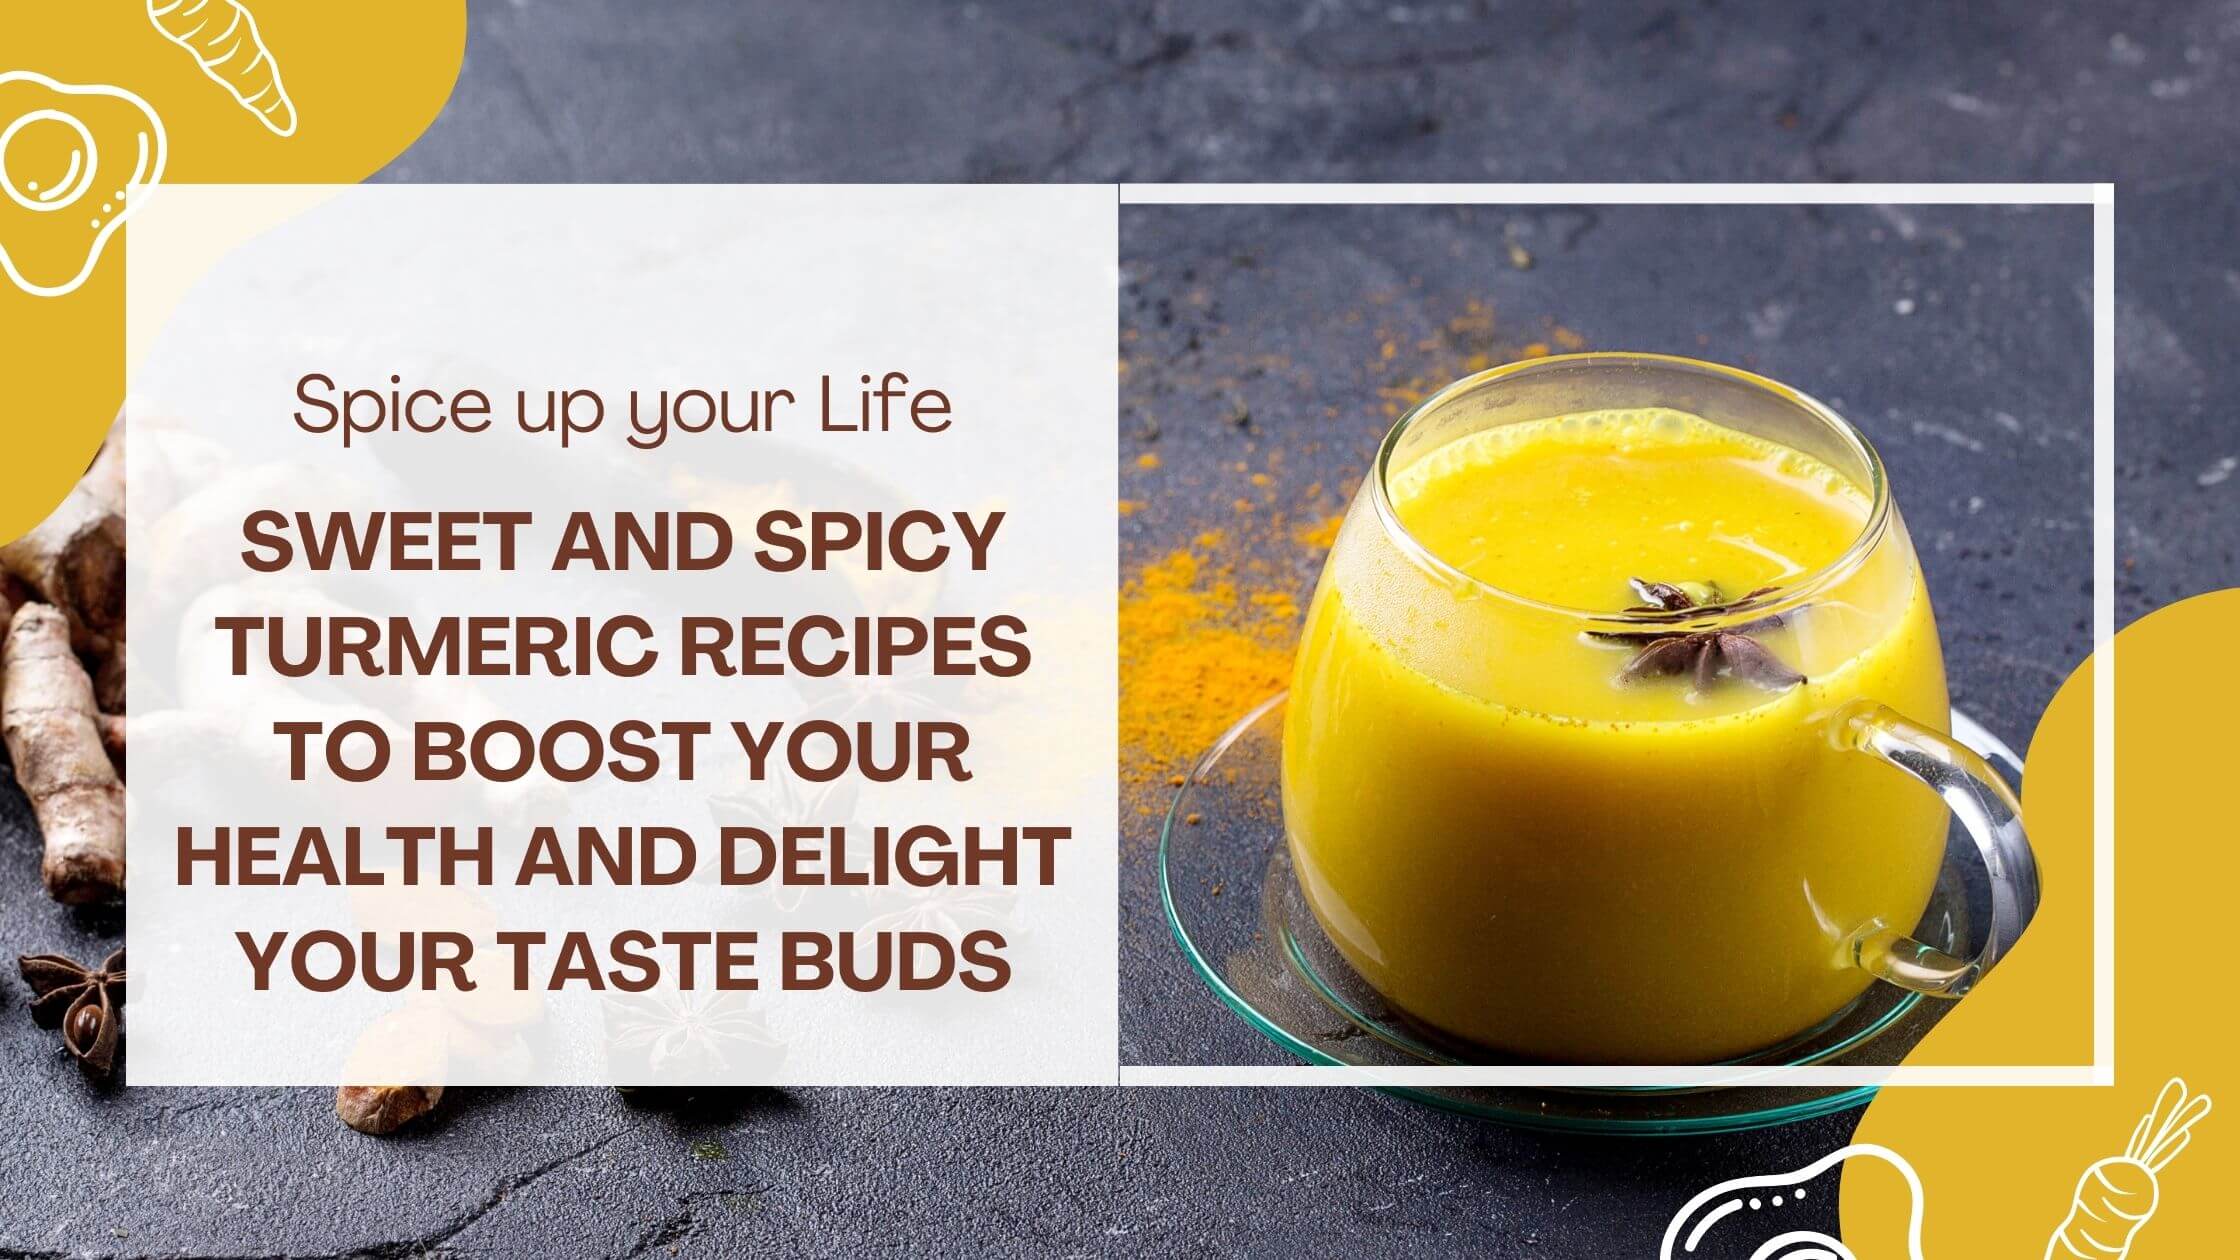 Spice up your Life: Sweet and Spicy Turmeric Recipes to Boost Your Health and Delight Your Taste Buds 2